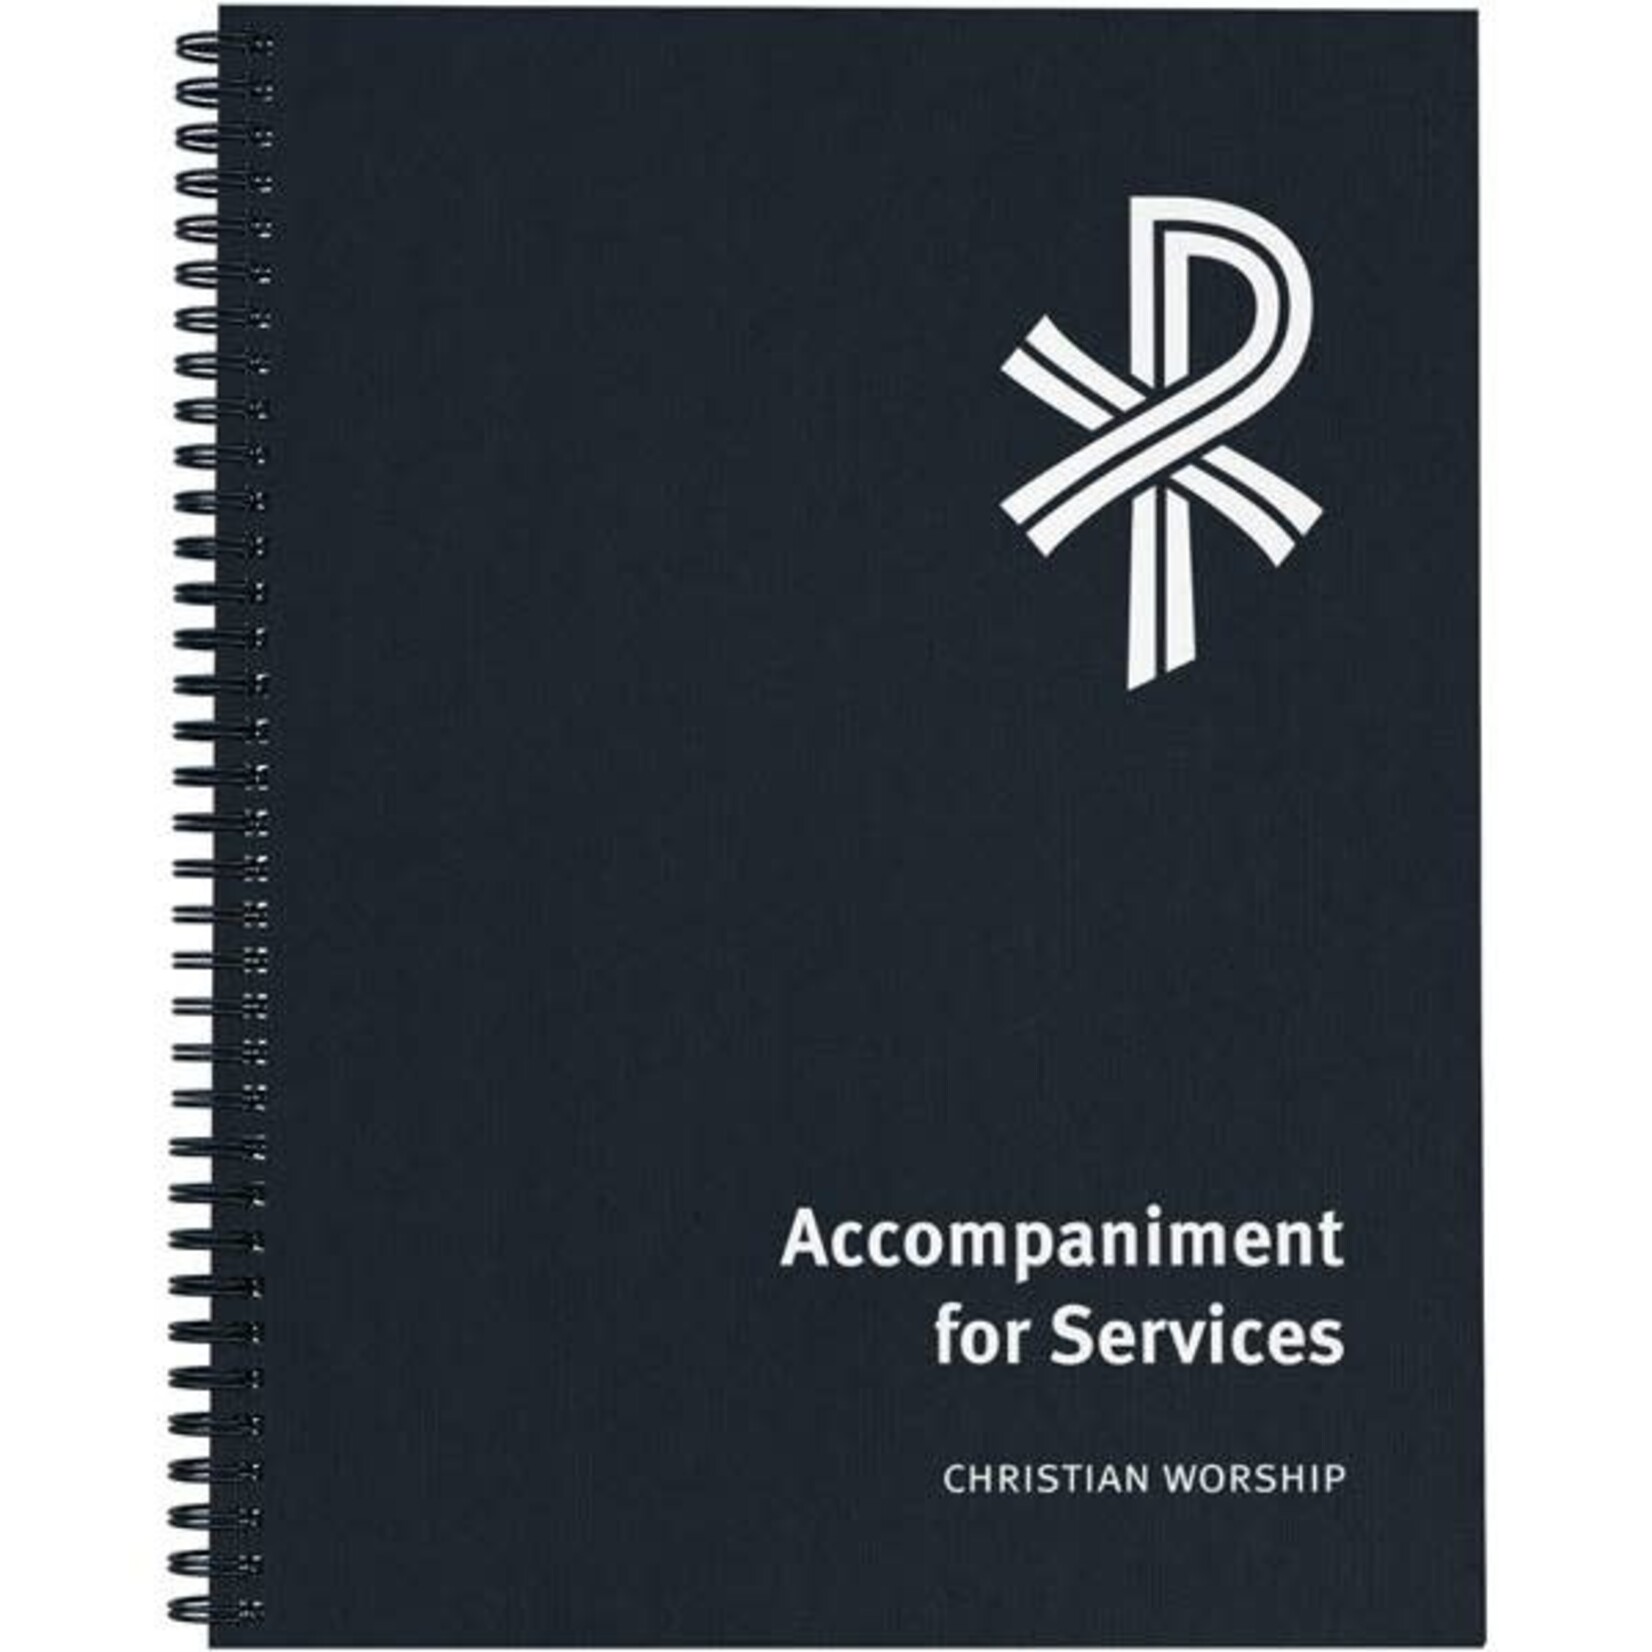 Christian Worship - Accompaniment for Services